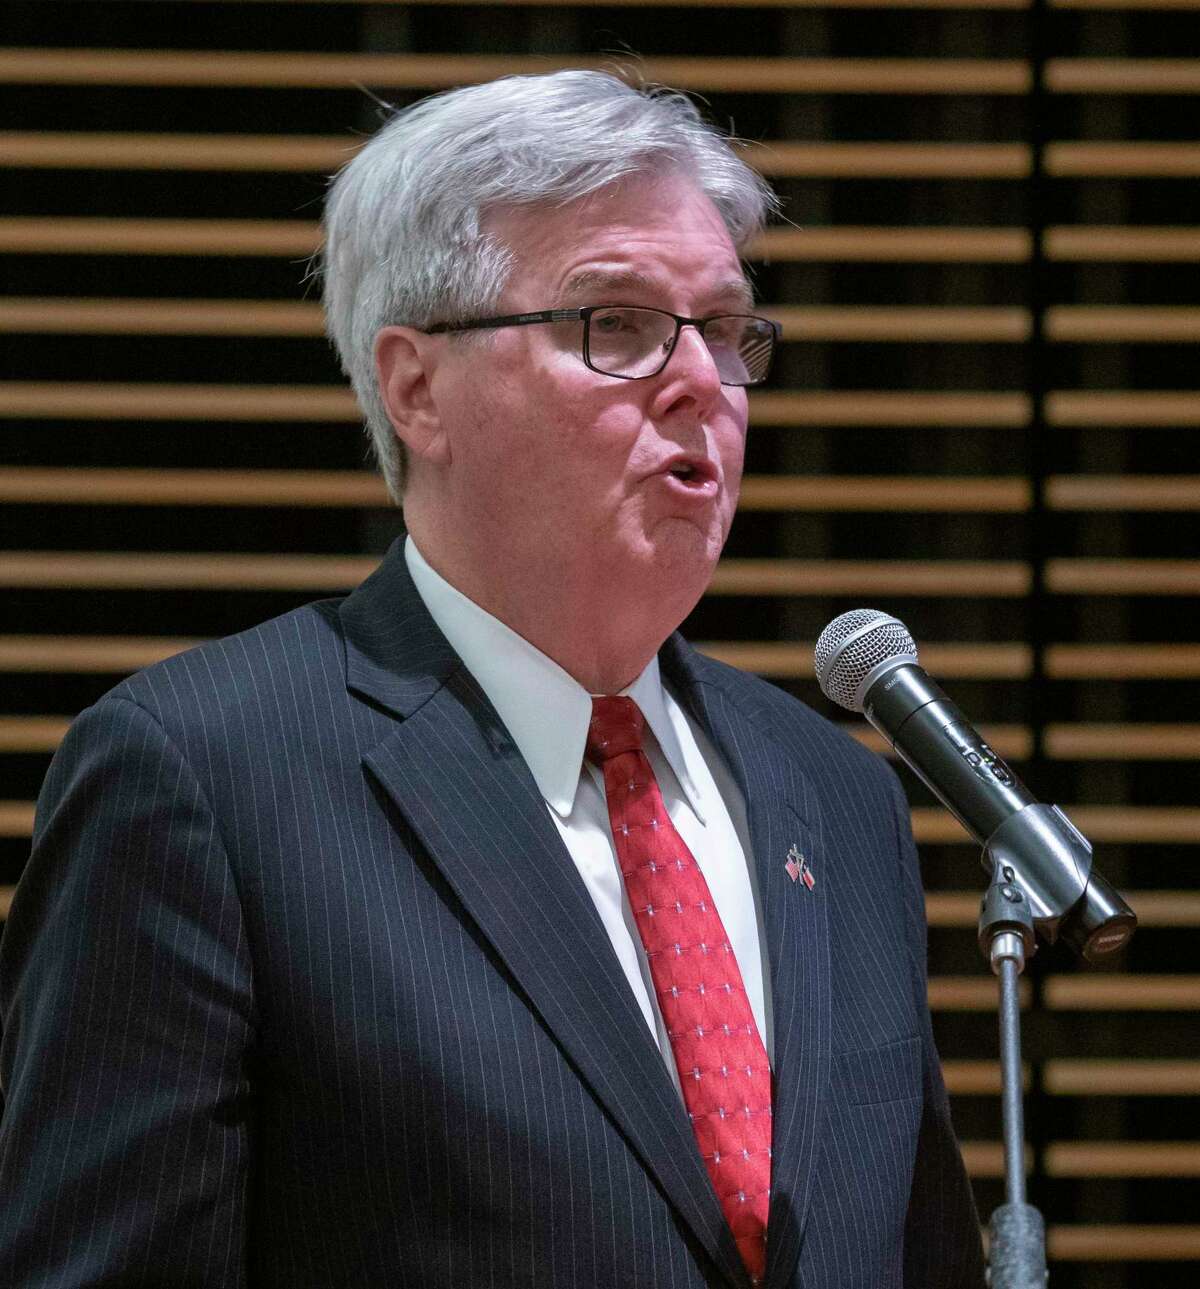 Texas Lt. Governor Dan Patrick at the Wagner Noel Performing Arts Center on Feb. 16, 2022.